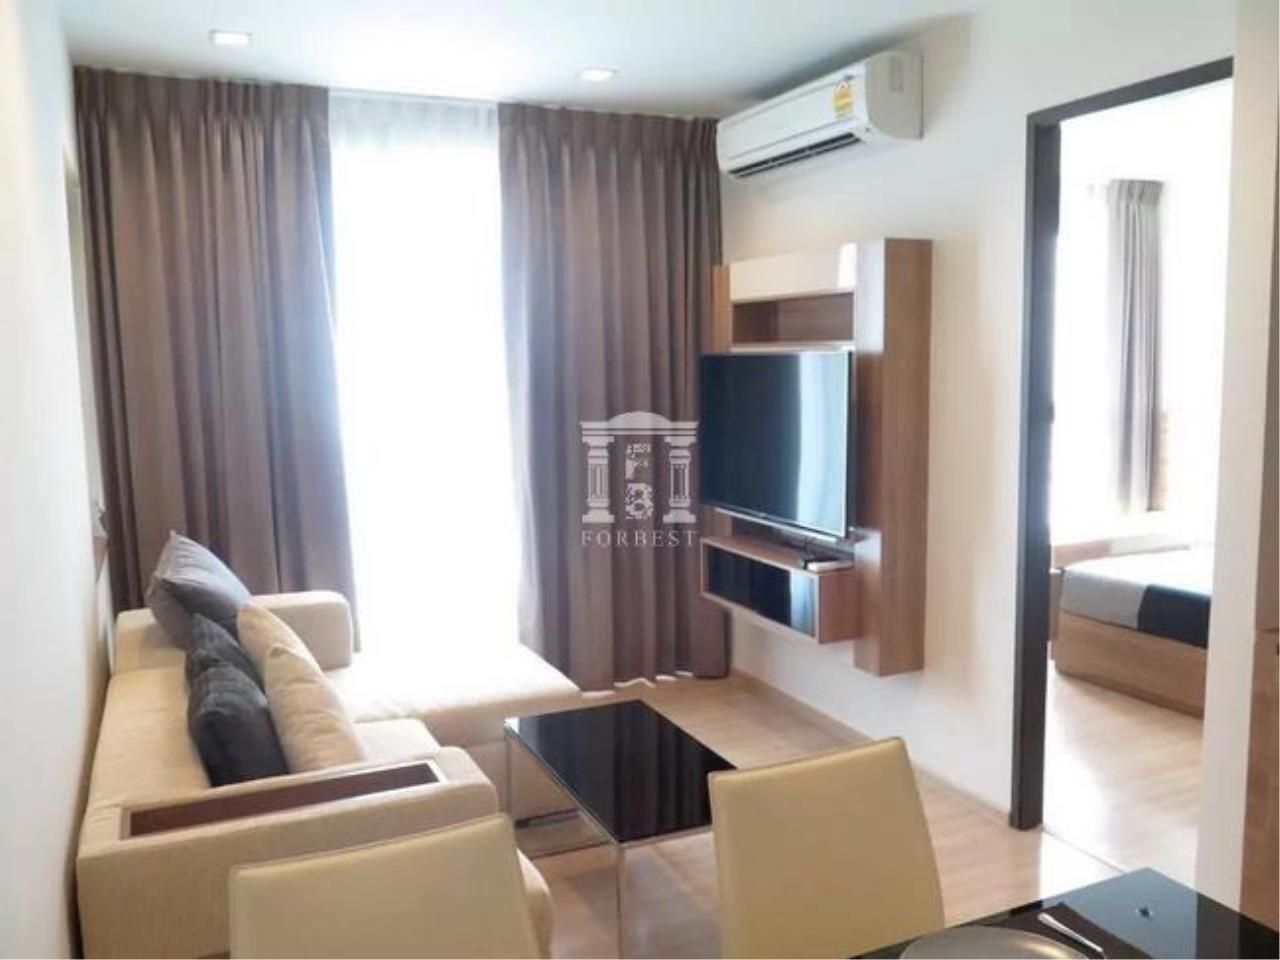 Forbest Properties Agency's 37322 - Rhythm, Sathorn Rd., Condo for rent, area 45 Sq.m. 1 Bedroom 1